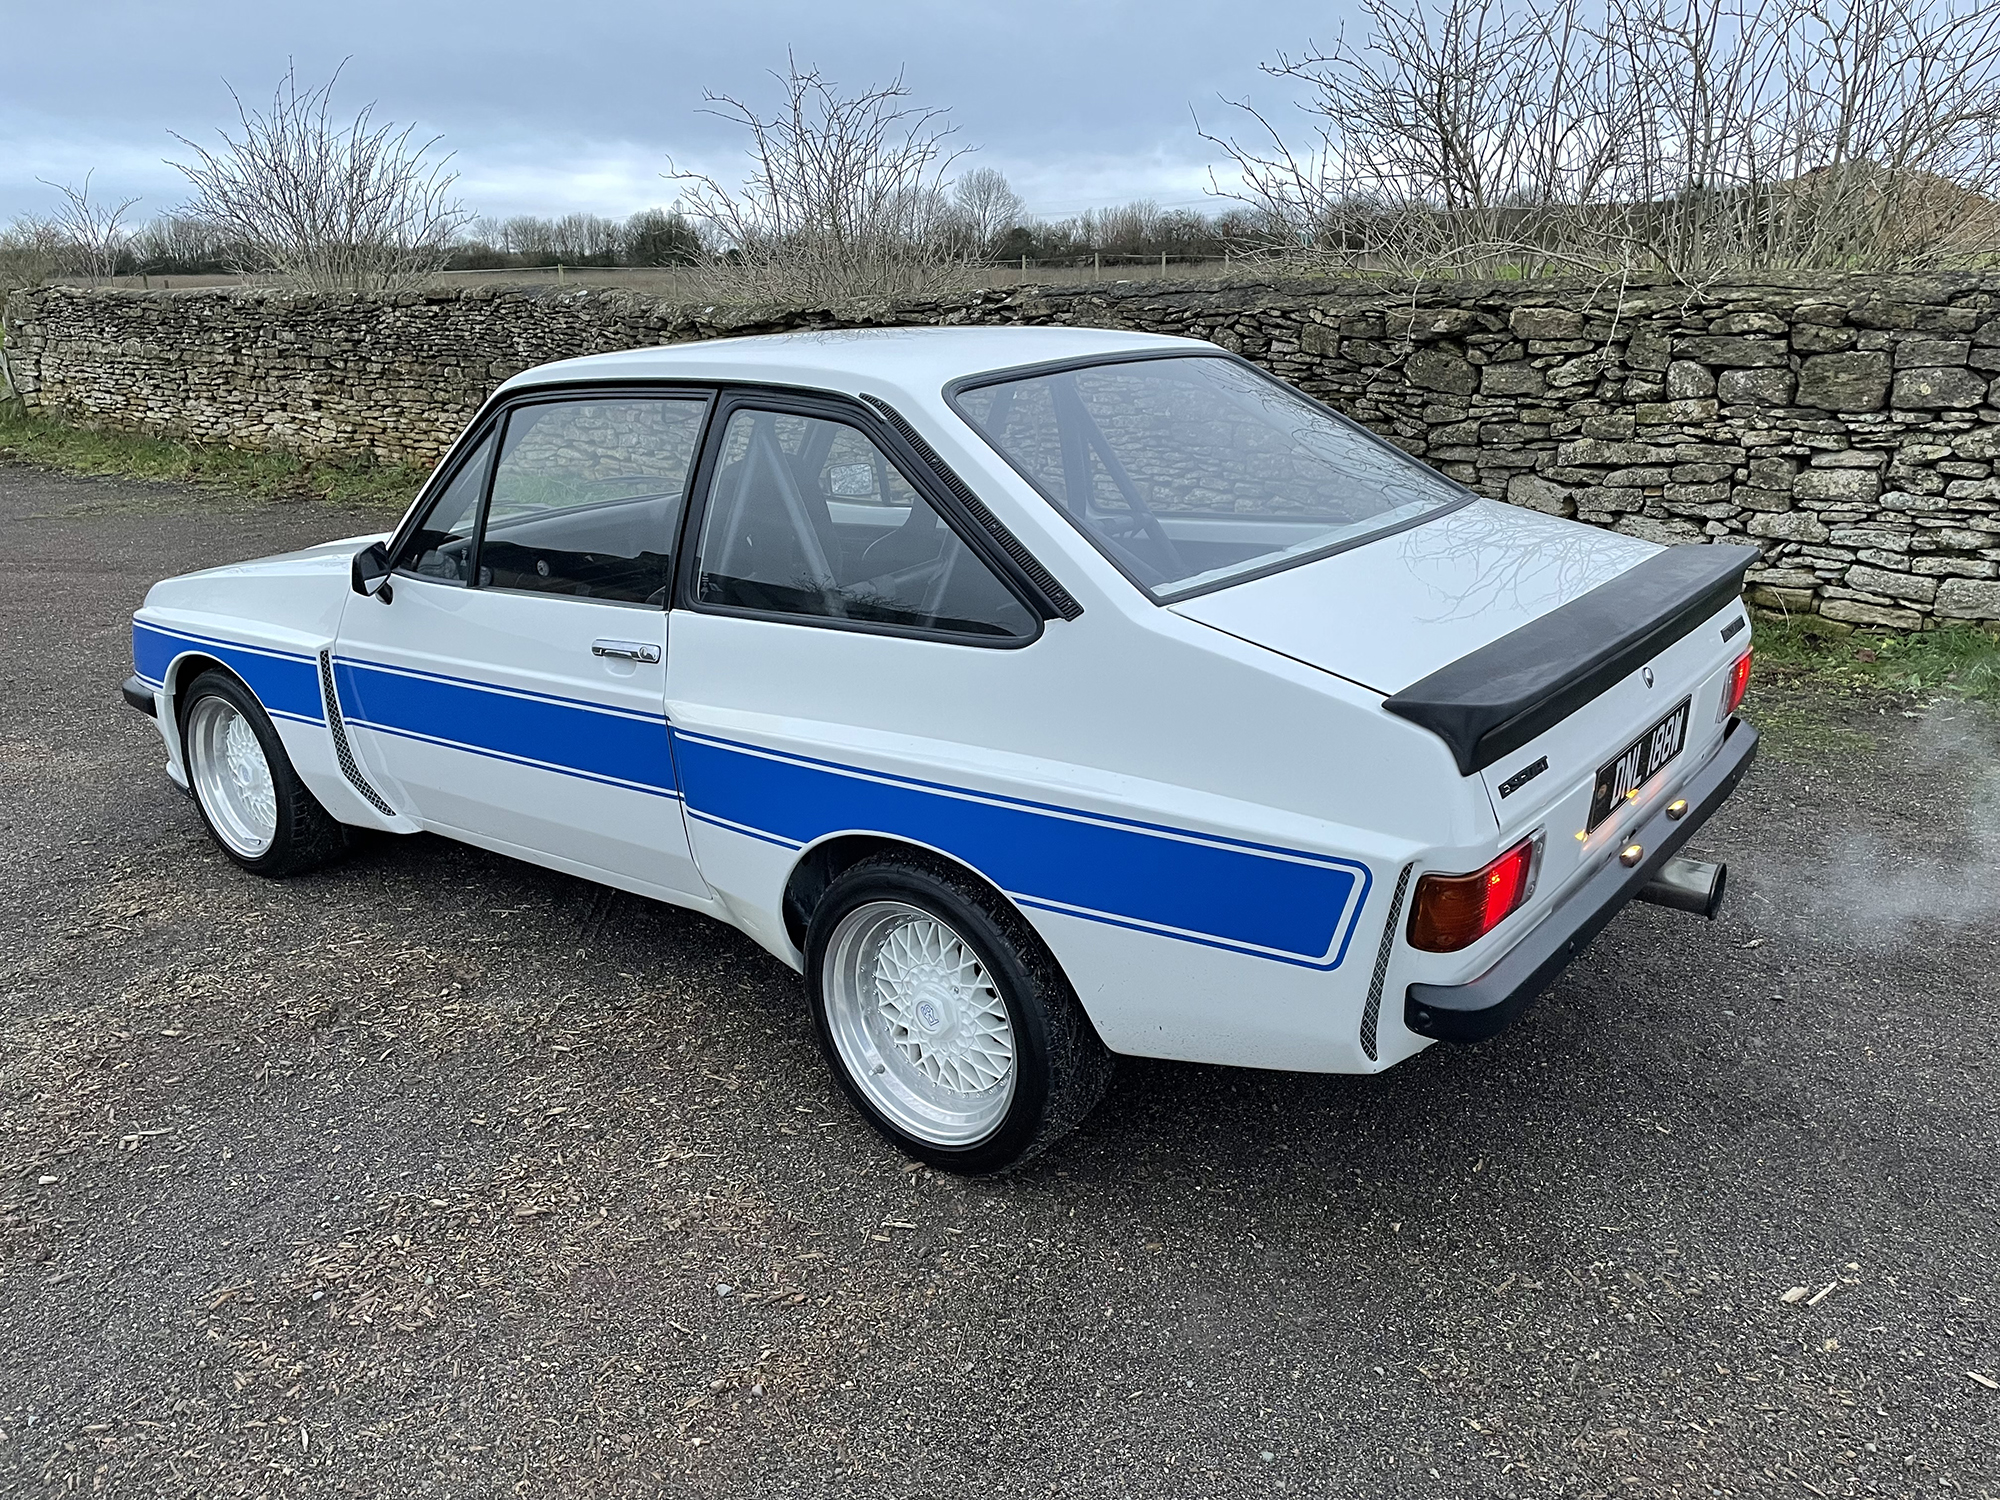 1980 Xpack Kitted Ford Escort Mk2 YB Cosworth Reg. no. DNL 188W Chassis no. BBATAA815570 - Image 7 of 28